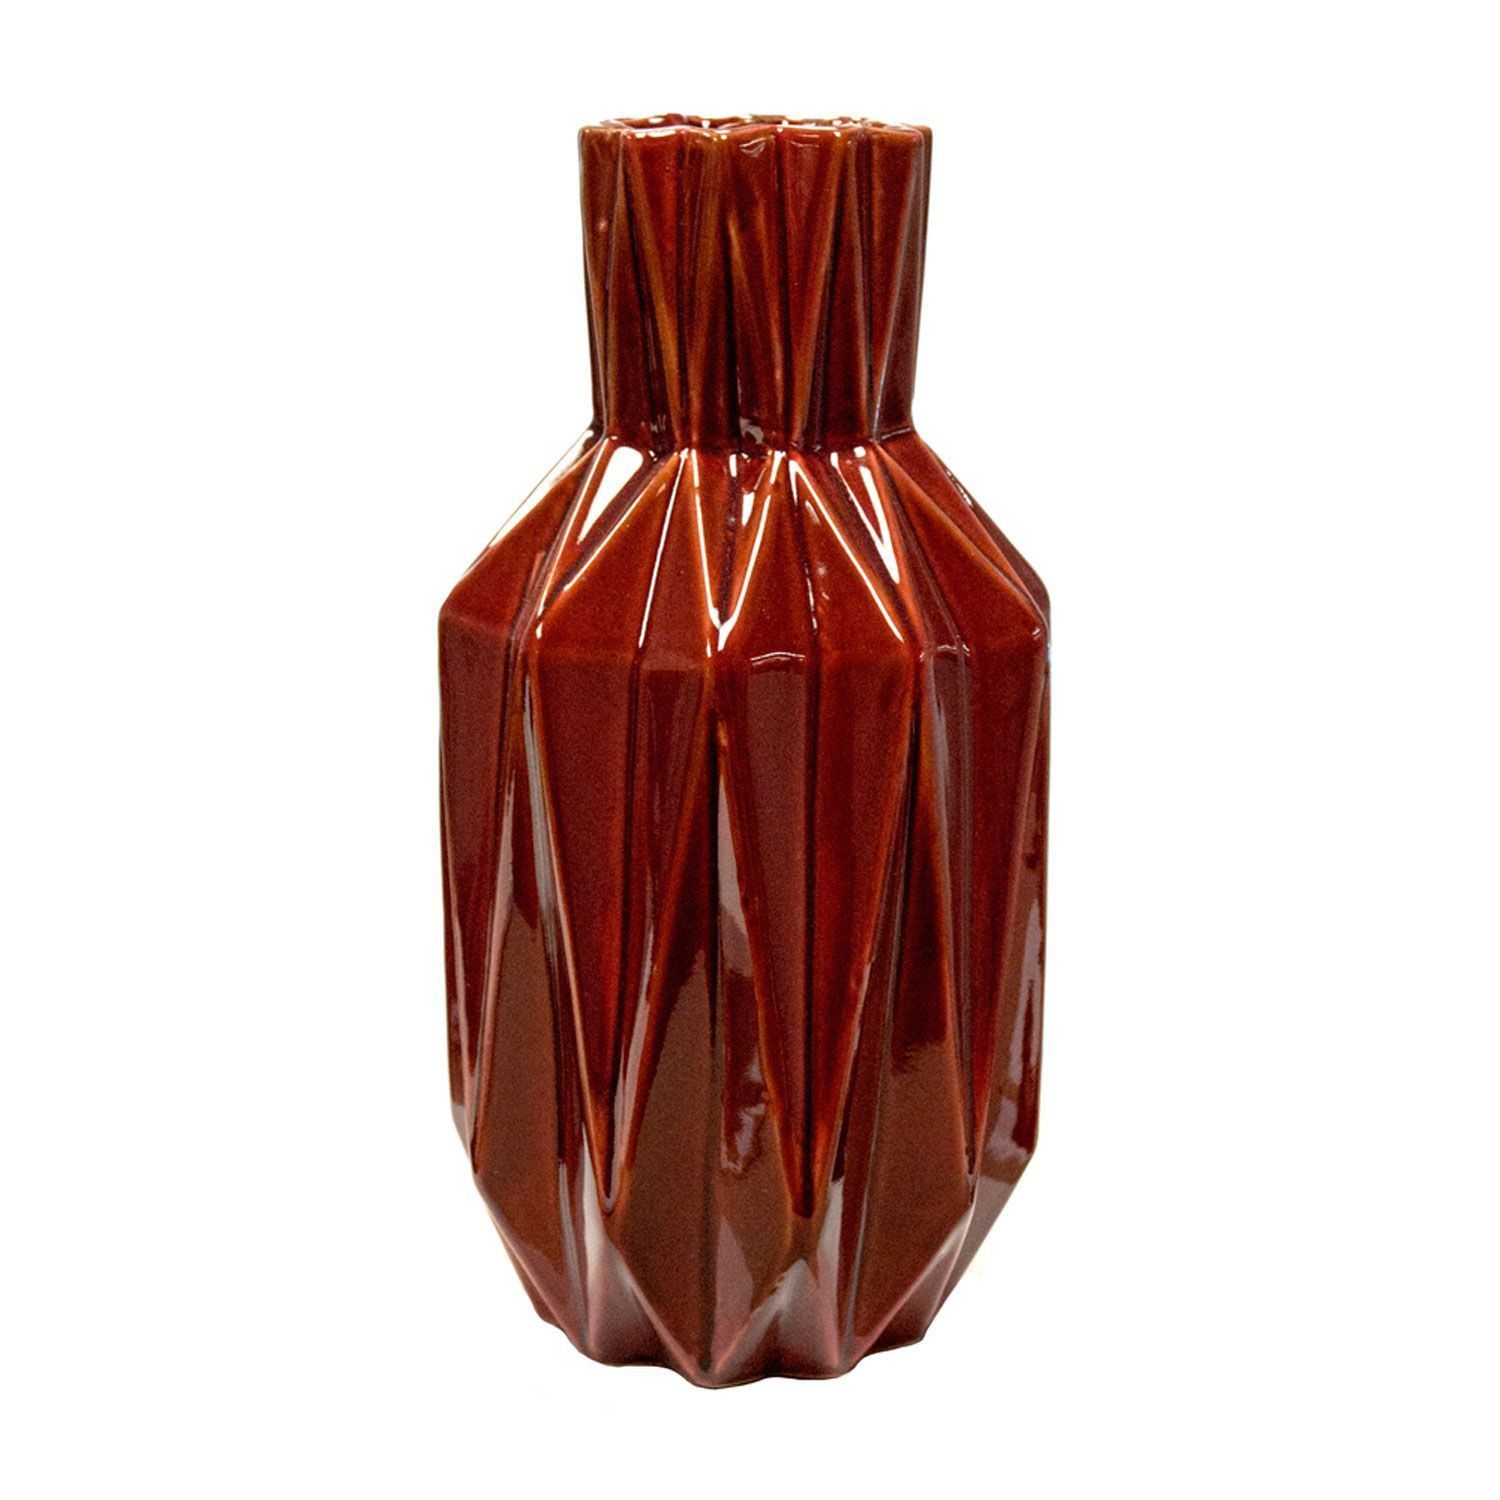 30 Wonderful Chinese Vases for Sale Uk 2024 free download chinese vases for sale uk of 22 large chinese vases for the floor the weekly world with regard to red calista bottle vase medium sagebrook home vases vases home decor